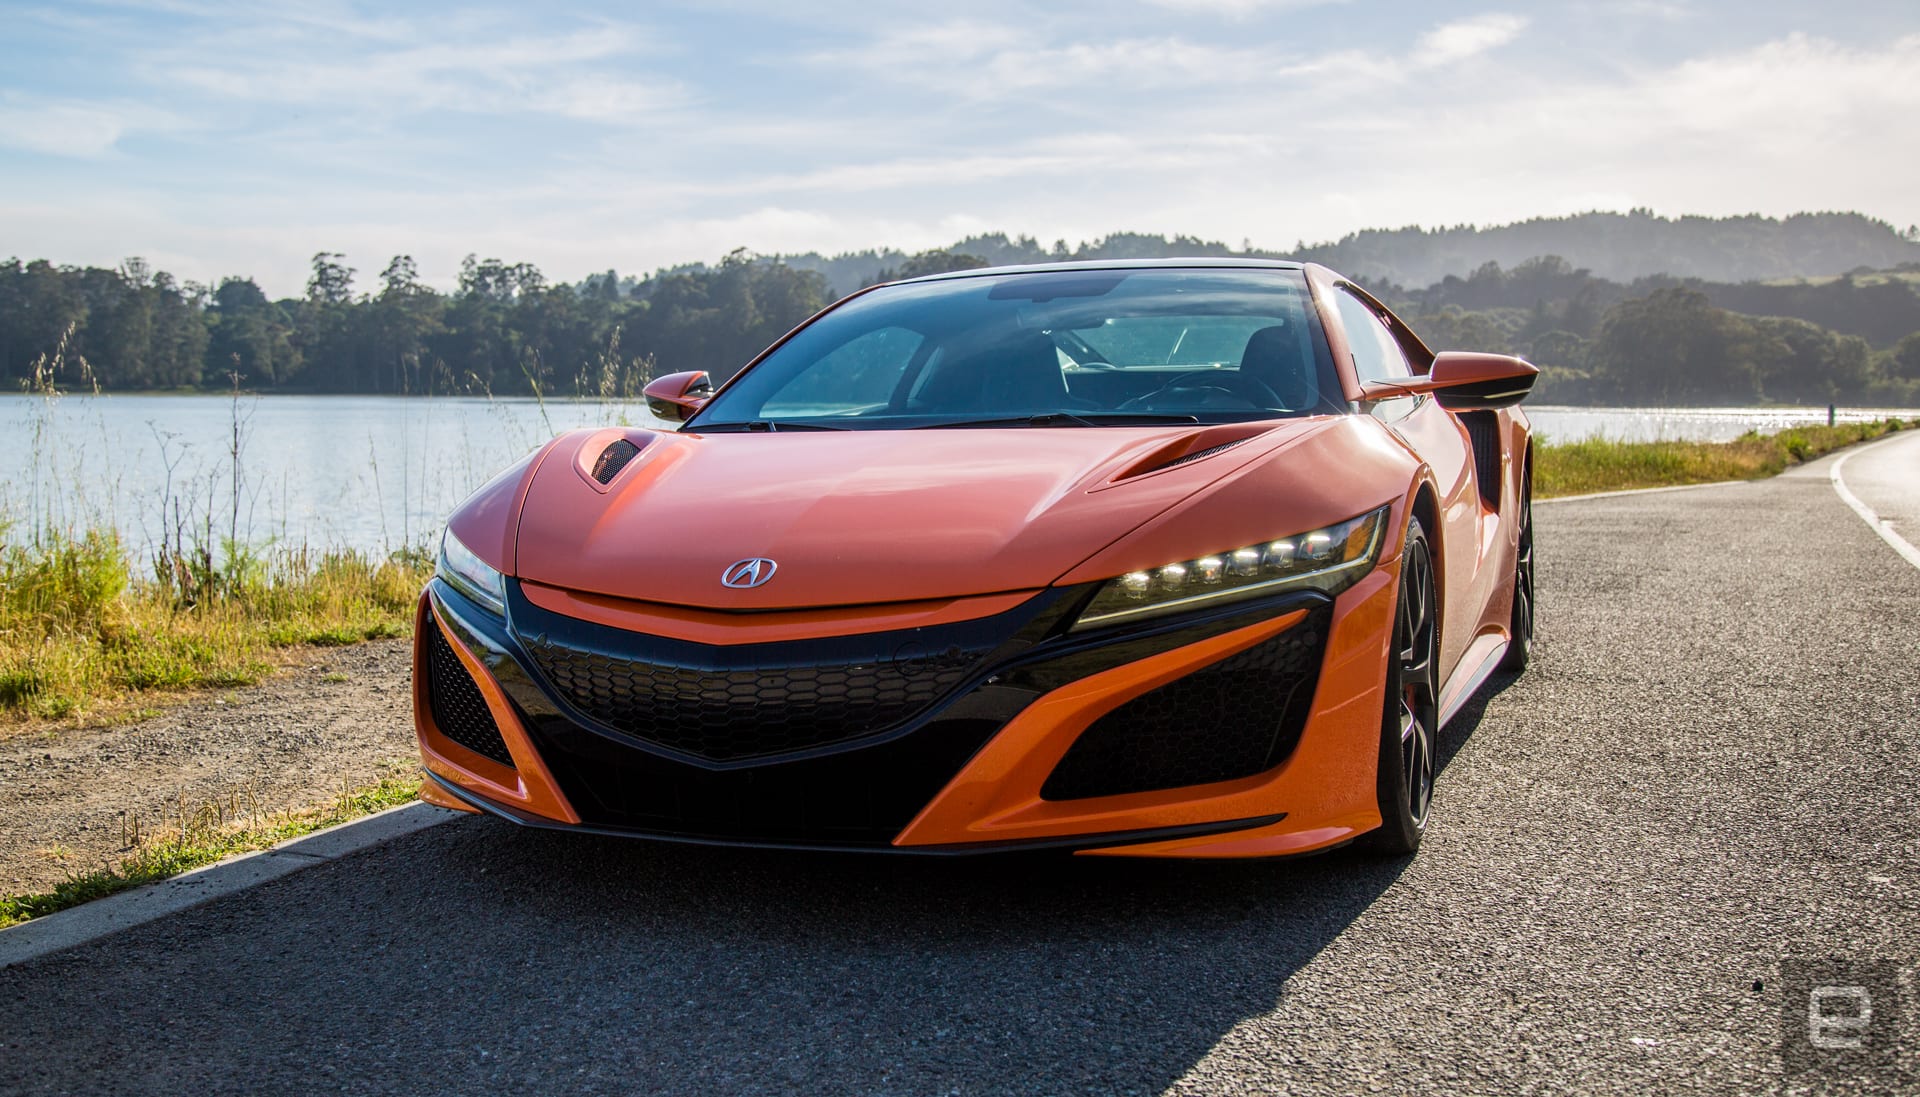 2019 Acura NSX review